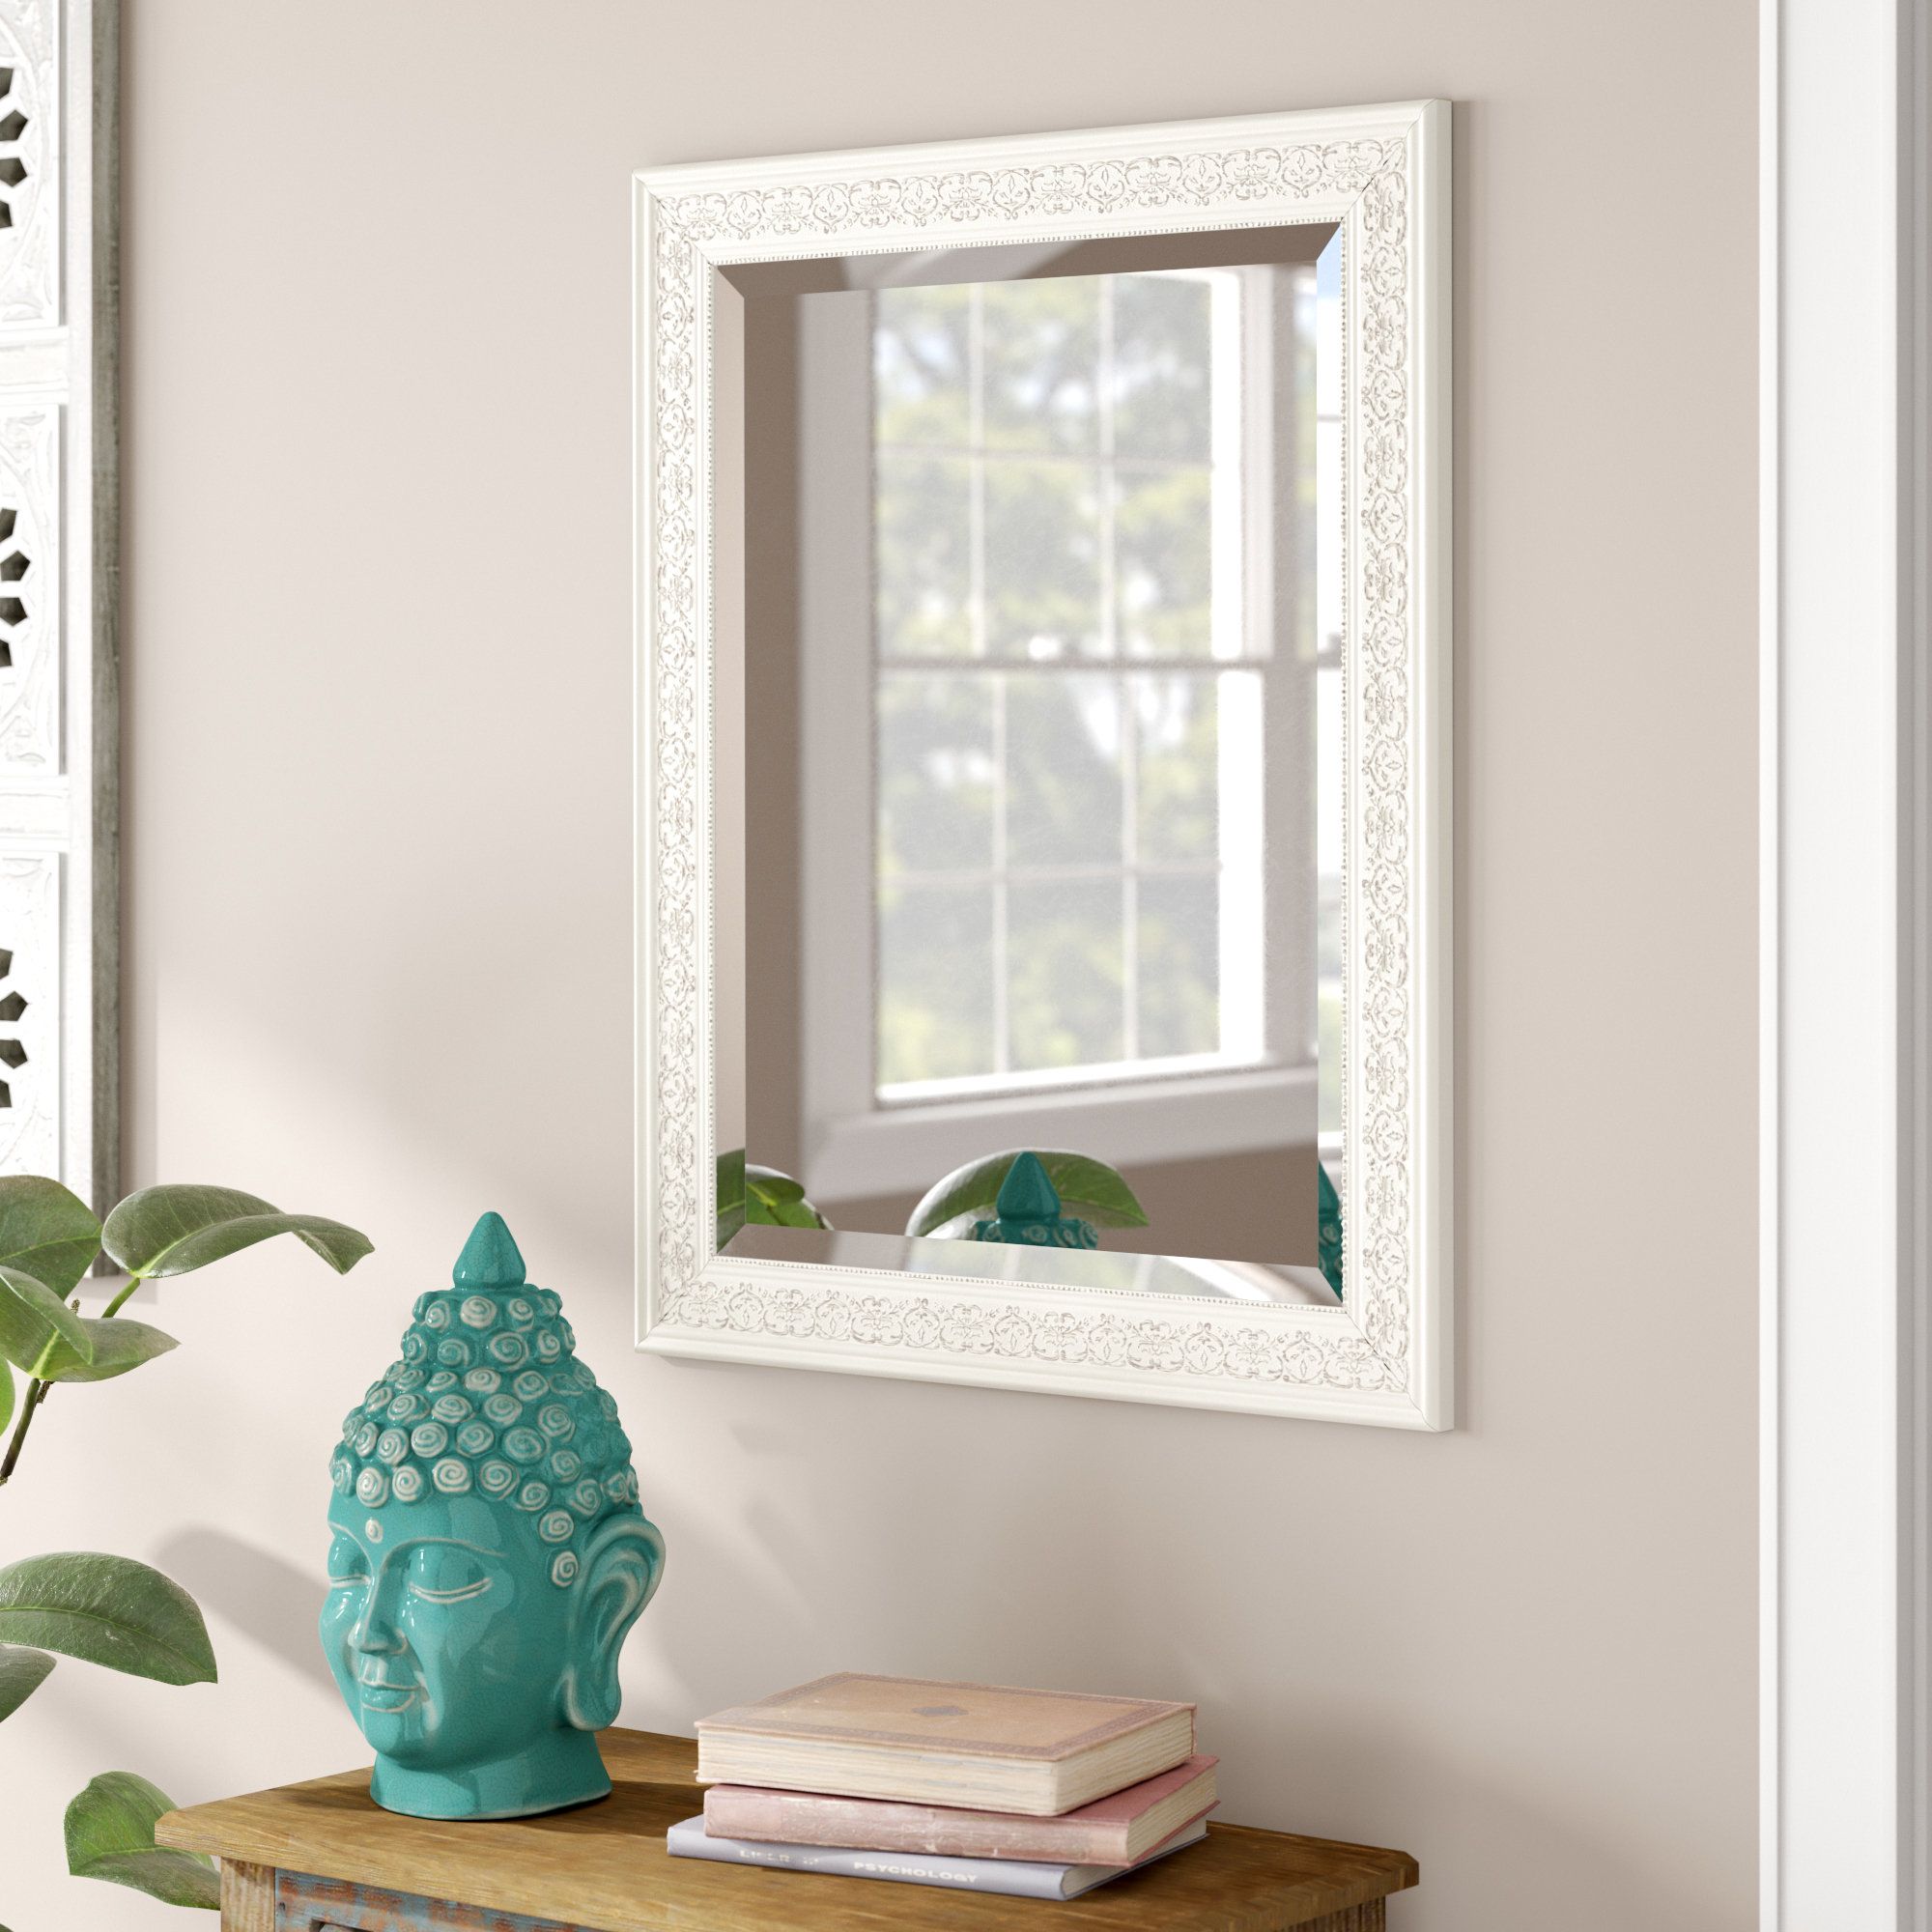 Focht Decorative Frame Accent Mirror Throughout Farmhouse Woodgrain And Leaf Accent Wall Mirrors (View 18 of 20)